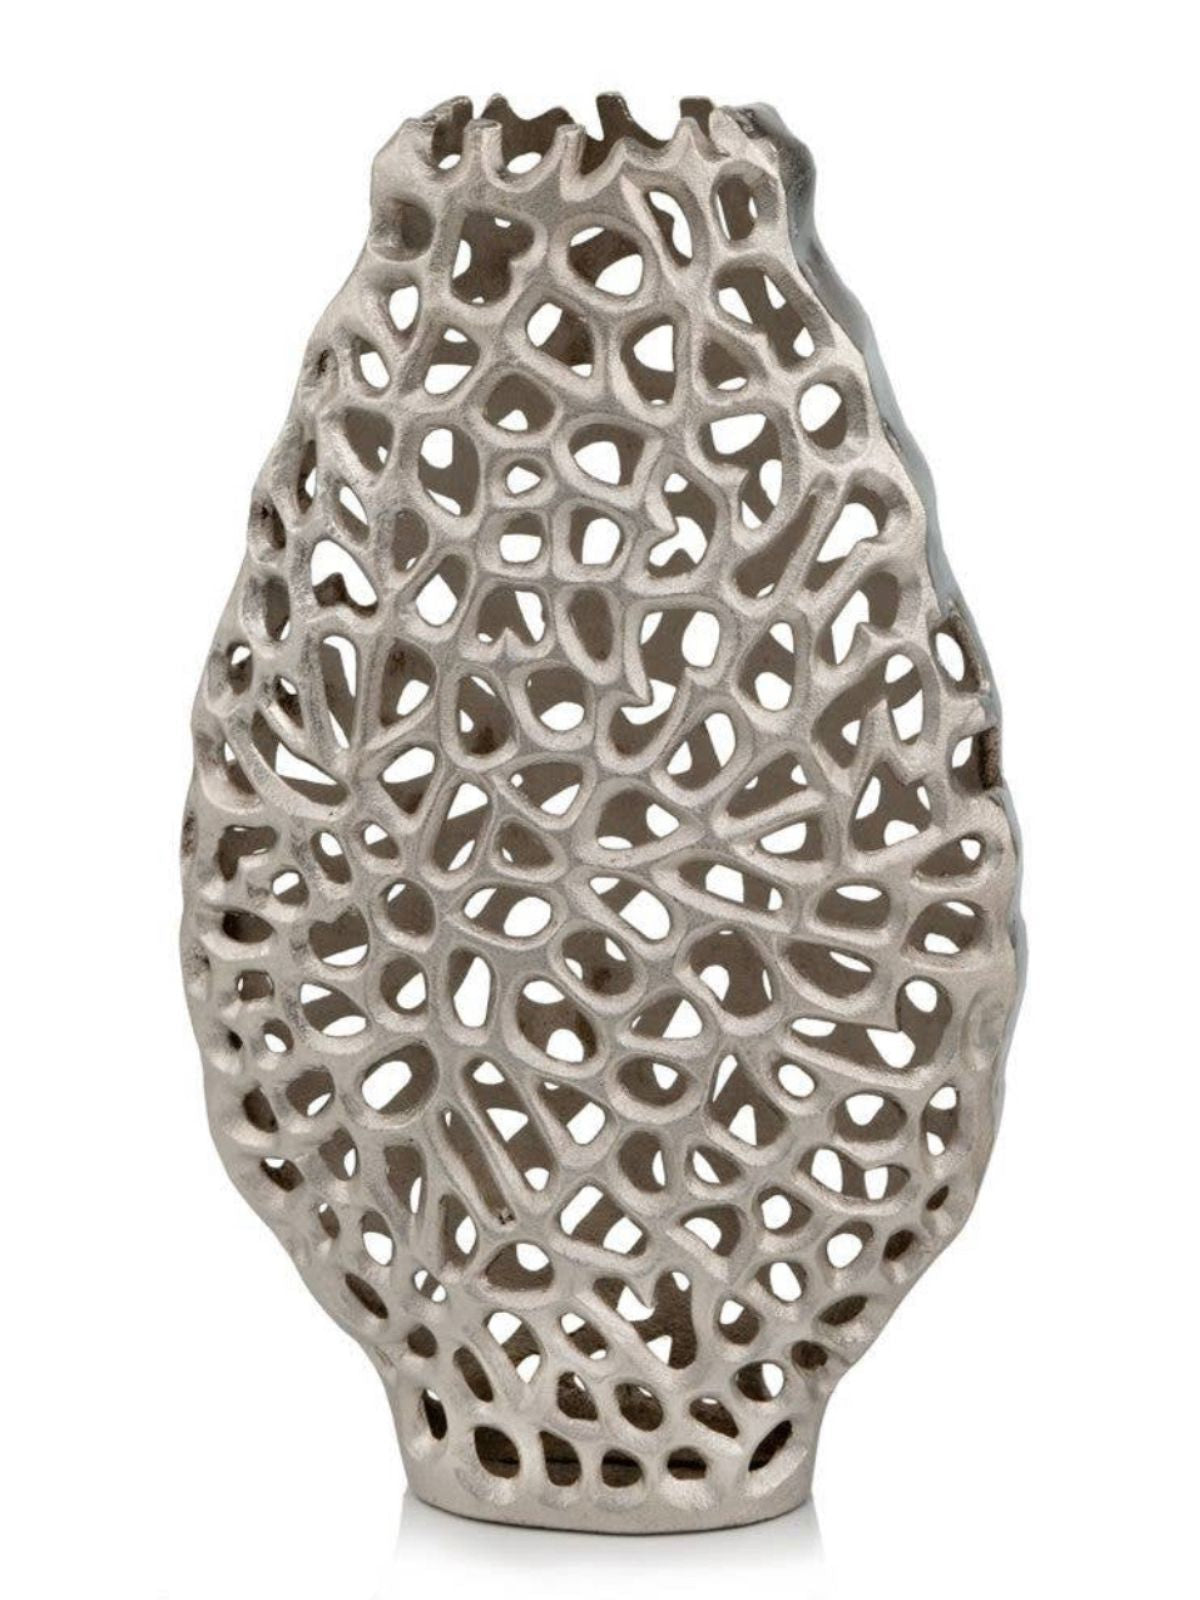 15.5 inch Shiny Nickel Coral Design Table Vase, Sold by KYA Home Decor.